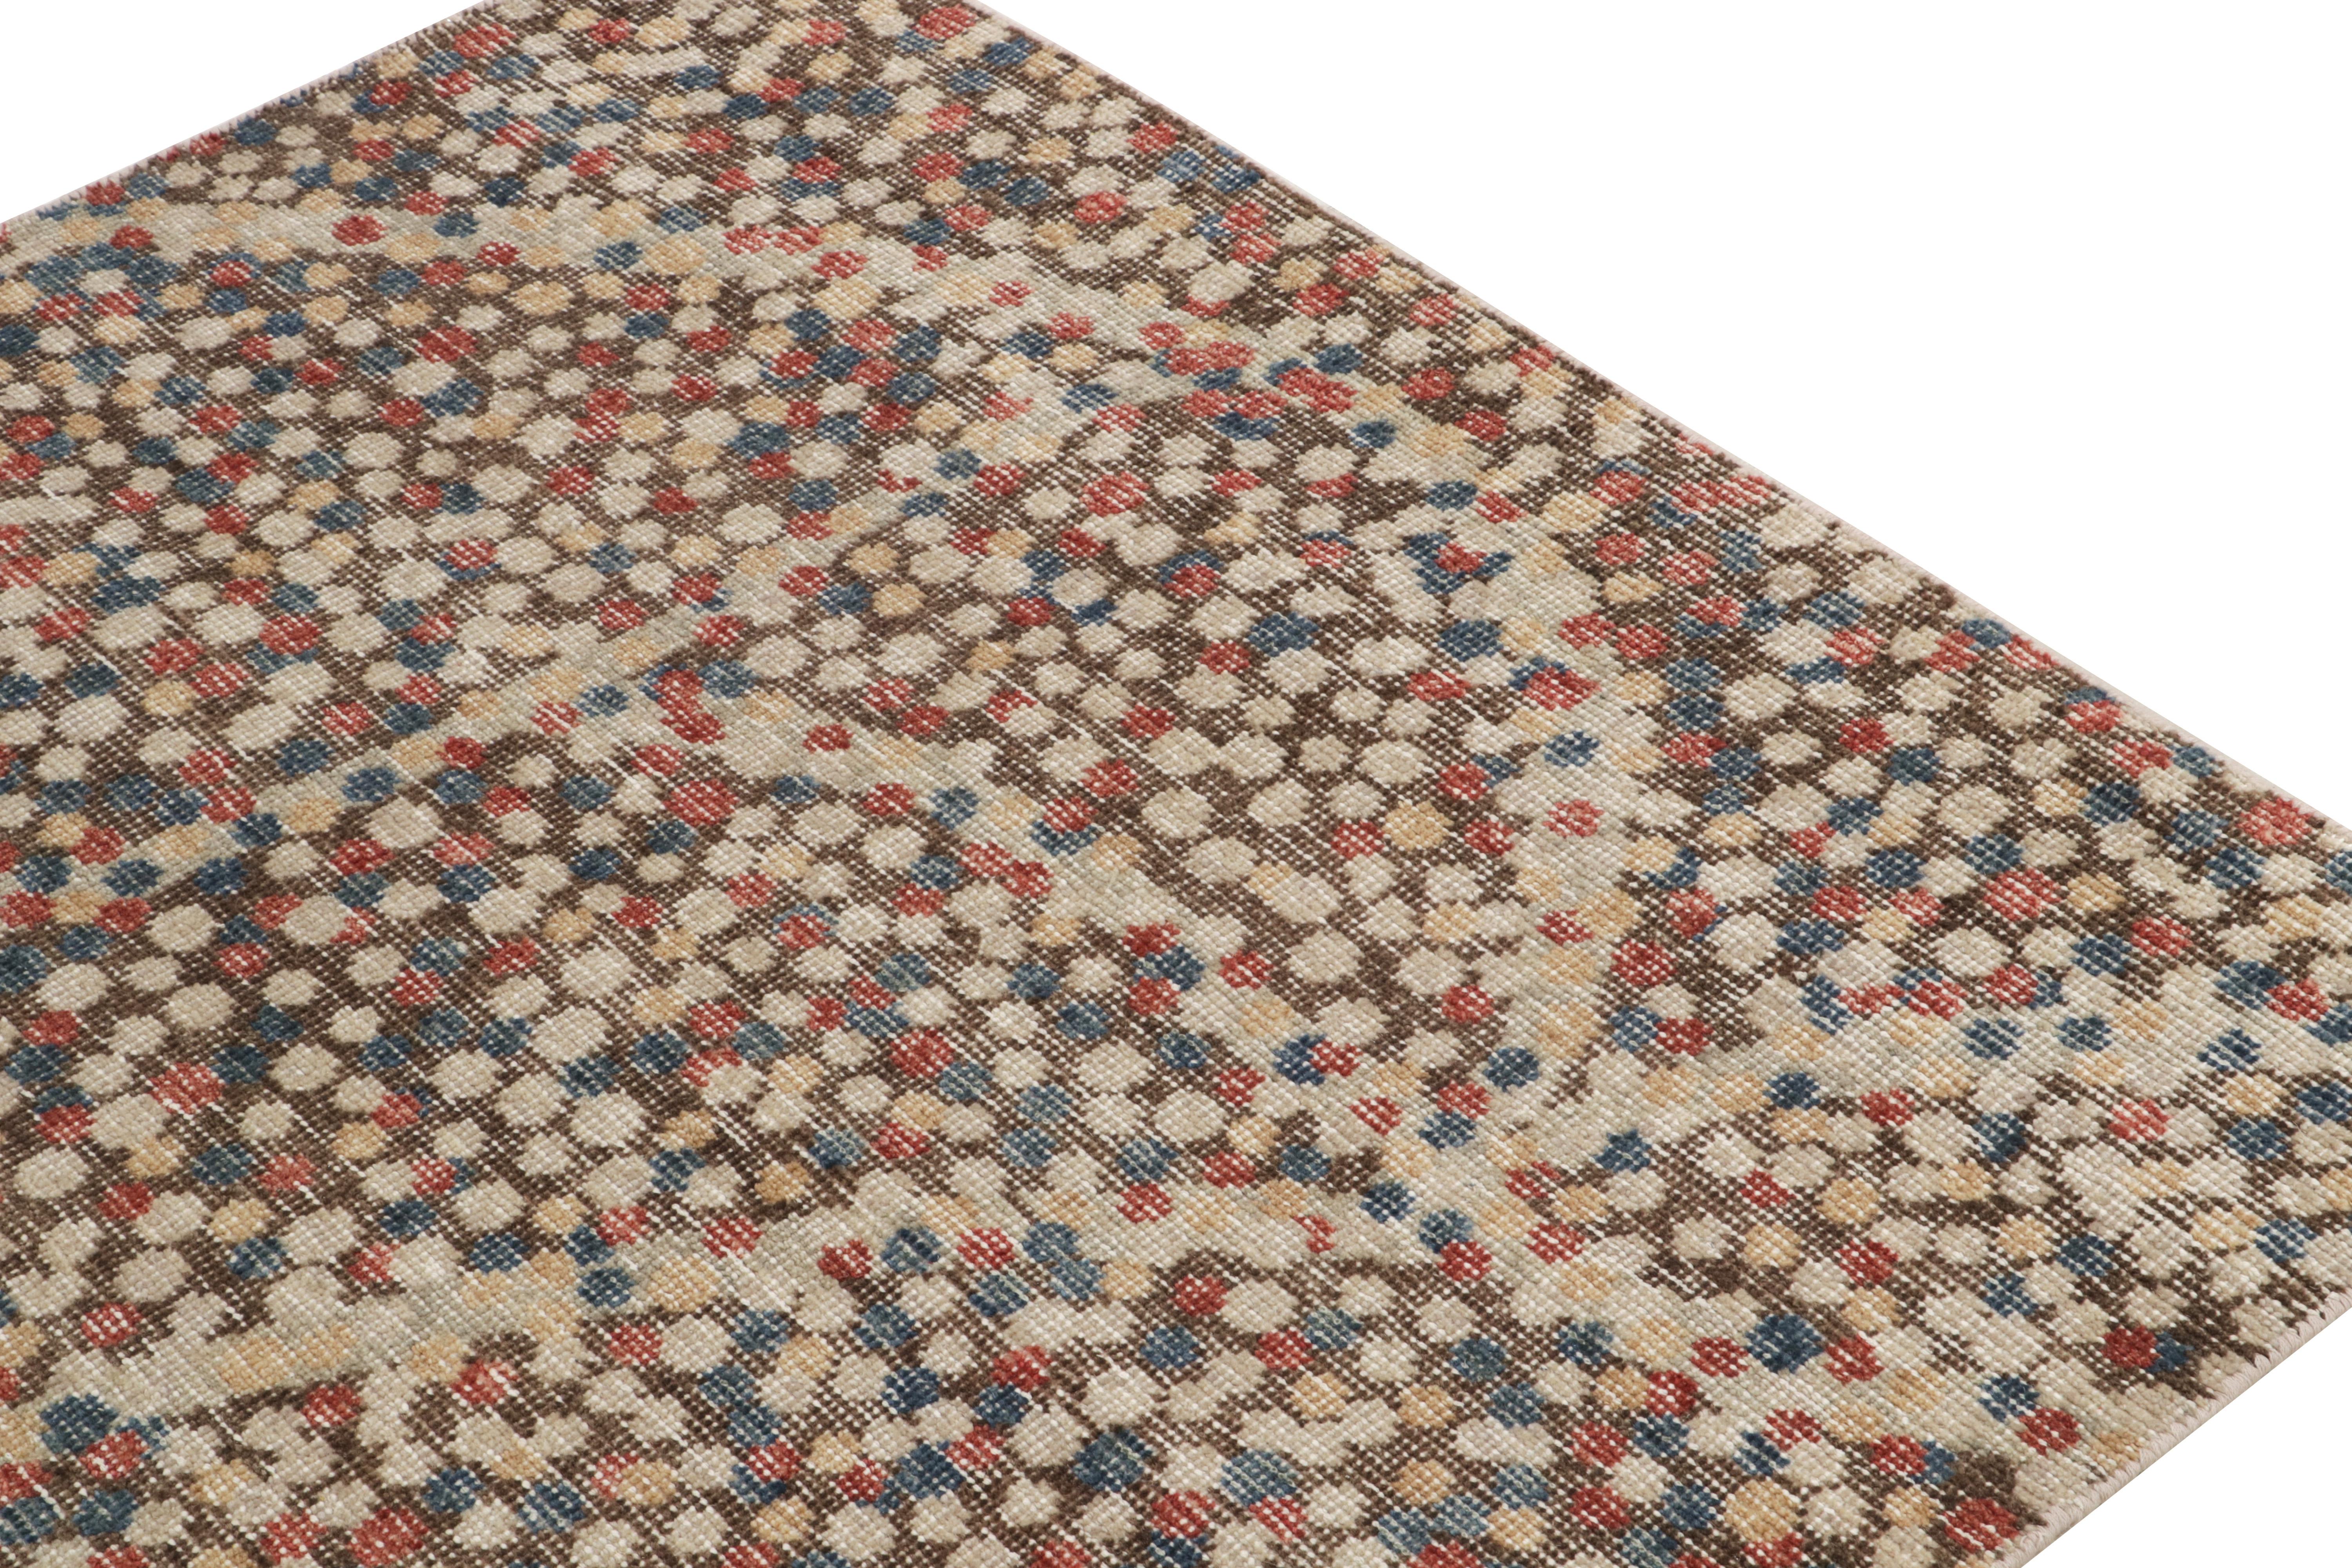 Indian Rug & Kilim's Distressed Abstract Rug in Brown, Red & Blue Dots Pattern For Sale